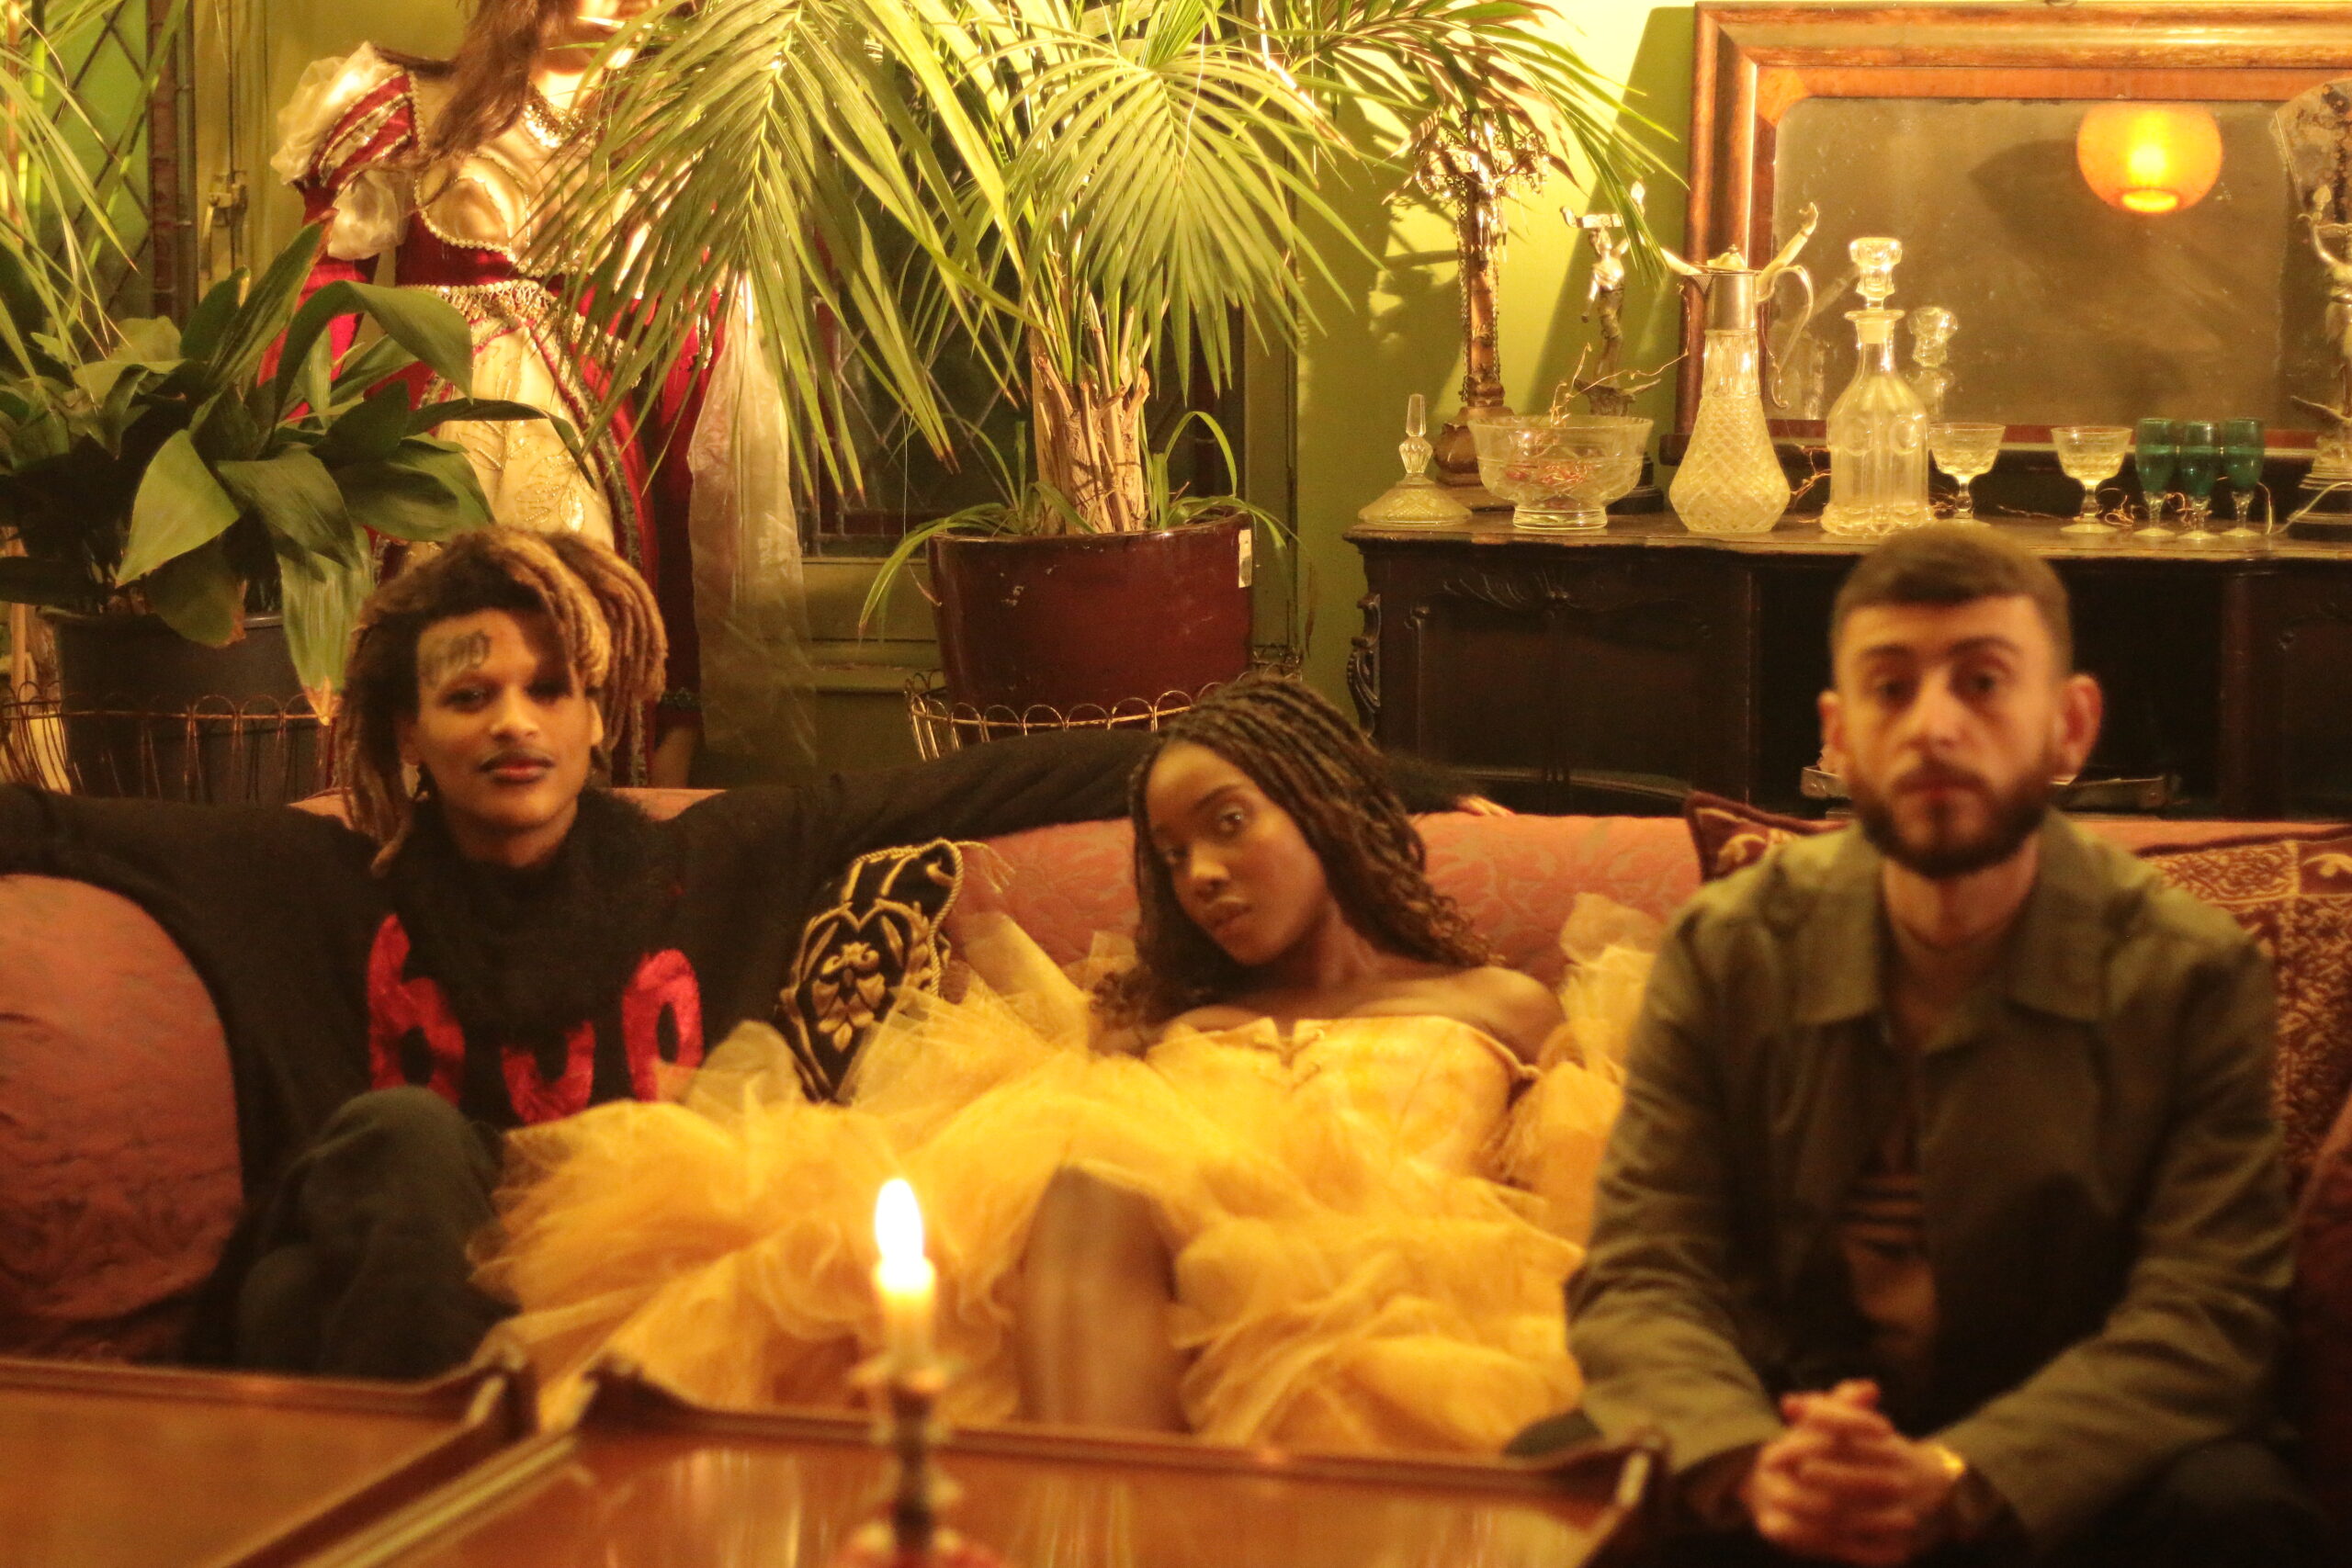 Inside a dimly lit room with a tall green plant at the back, and several glass ornaments sitting on a wooden cabinet. Three people sit on a sofa with a glass coffee table in front of them. A single lit candle sits on the coffee table. The three people look directly at the camera with neutral expressions.